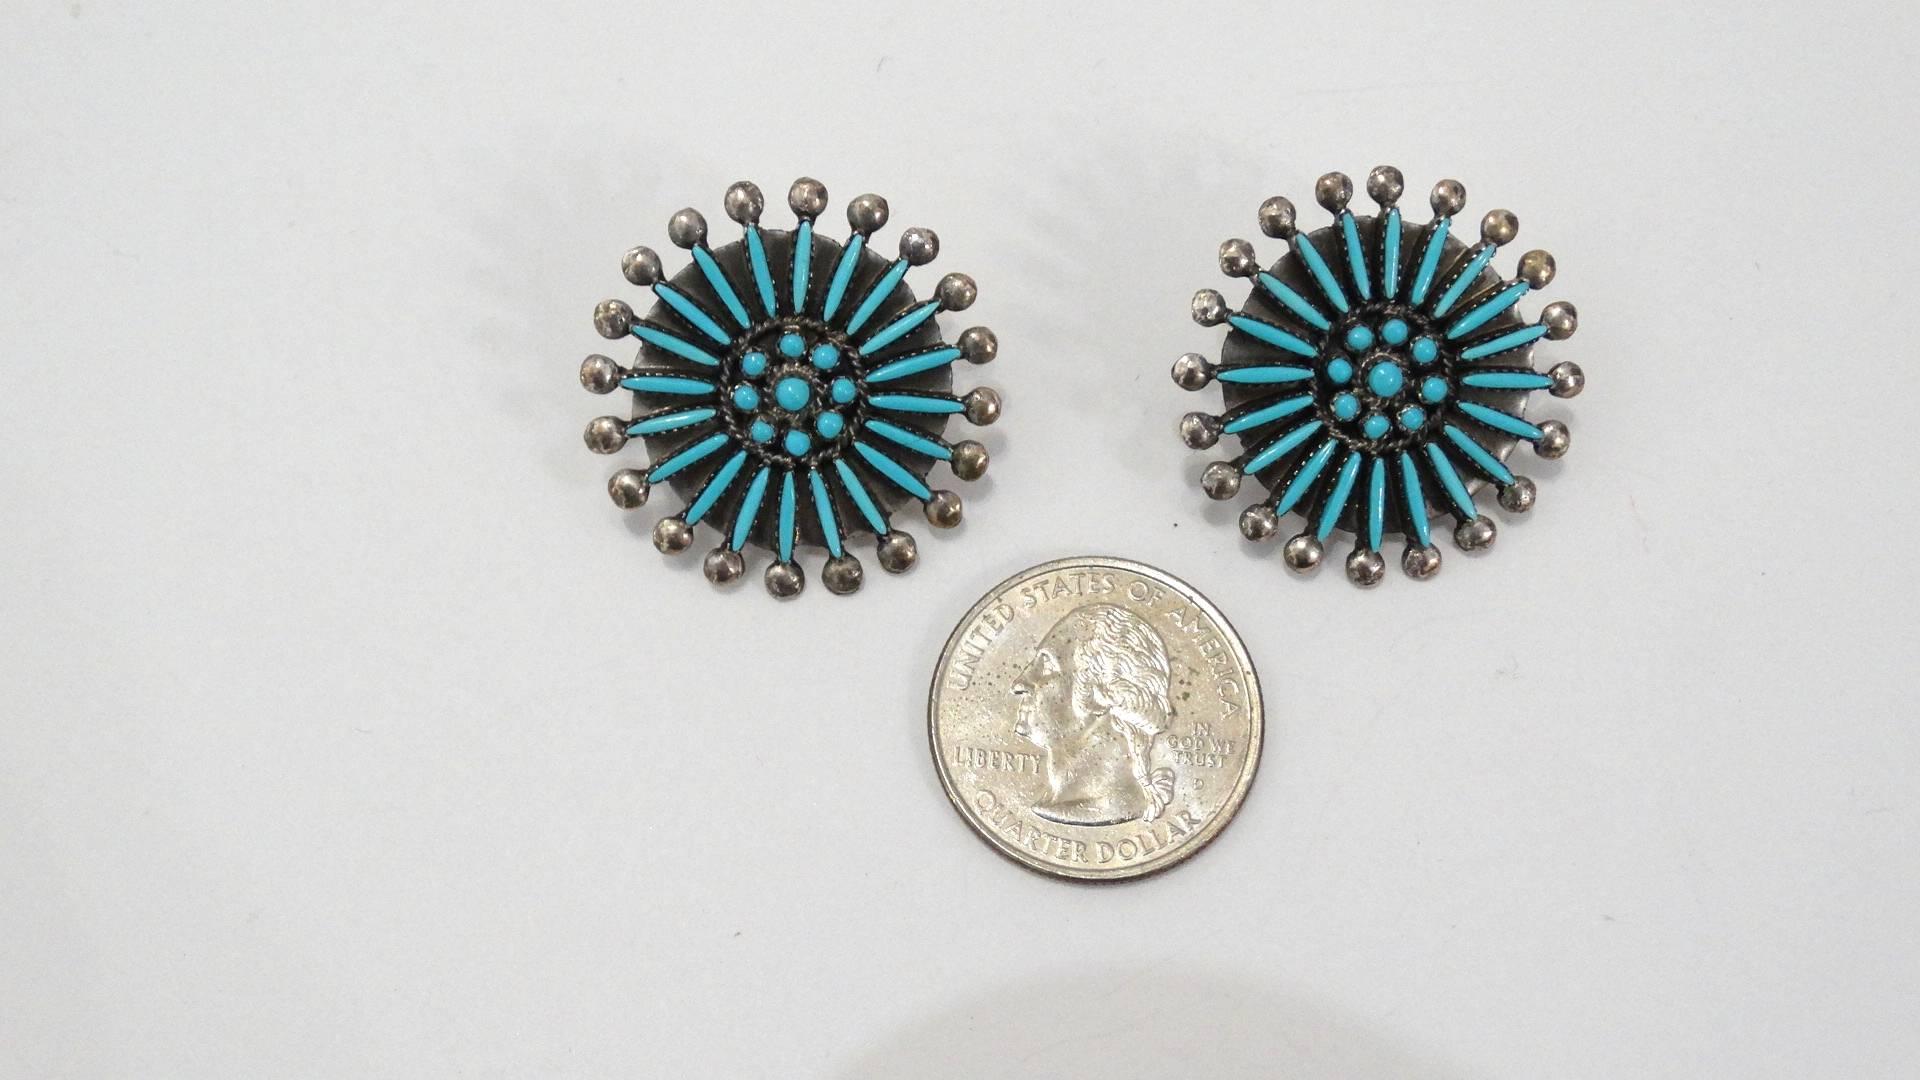 The most AMAZING pair of turquoise earrings, made by the Zuni Native American tribe! Made of a quality sterling silver, inlayed with a medallion of needle point cut turquoise stones, each tipped with a ball of silver. Rock these with your favorite